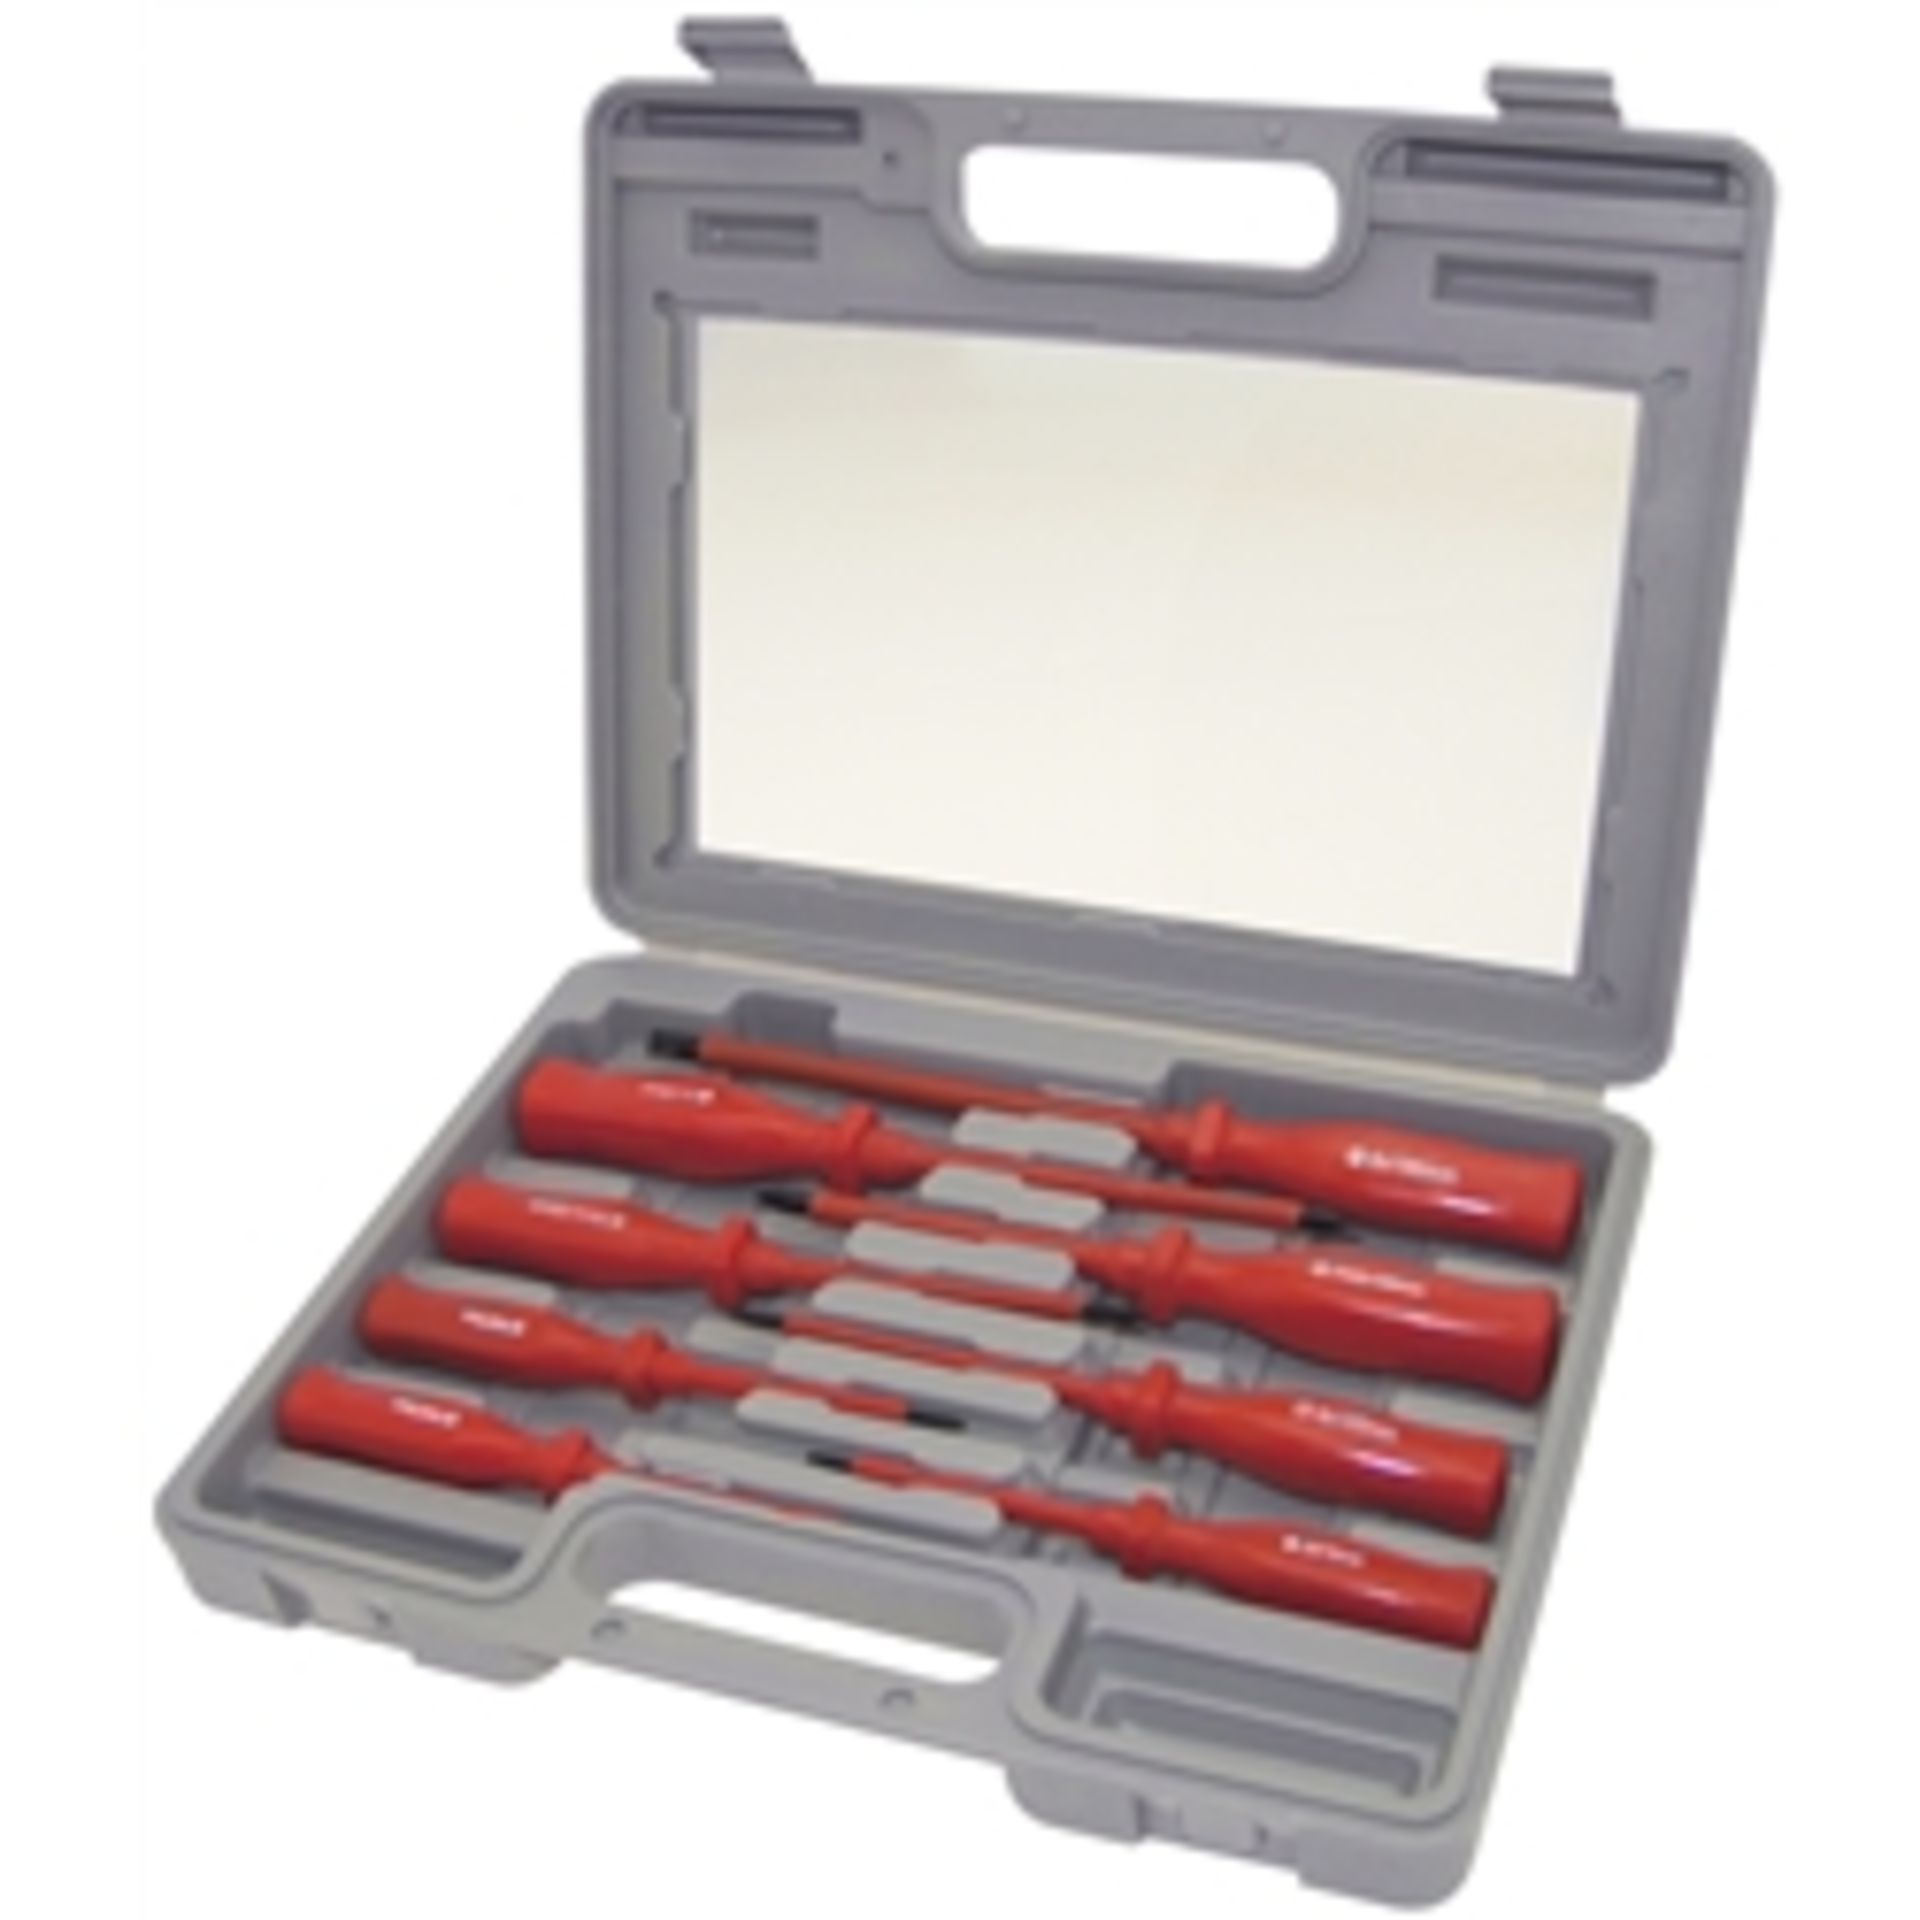 V Eight Piece Screwdriver Set In Case - Image 2 of 2